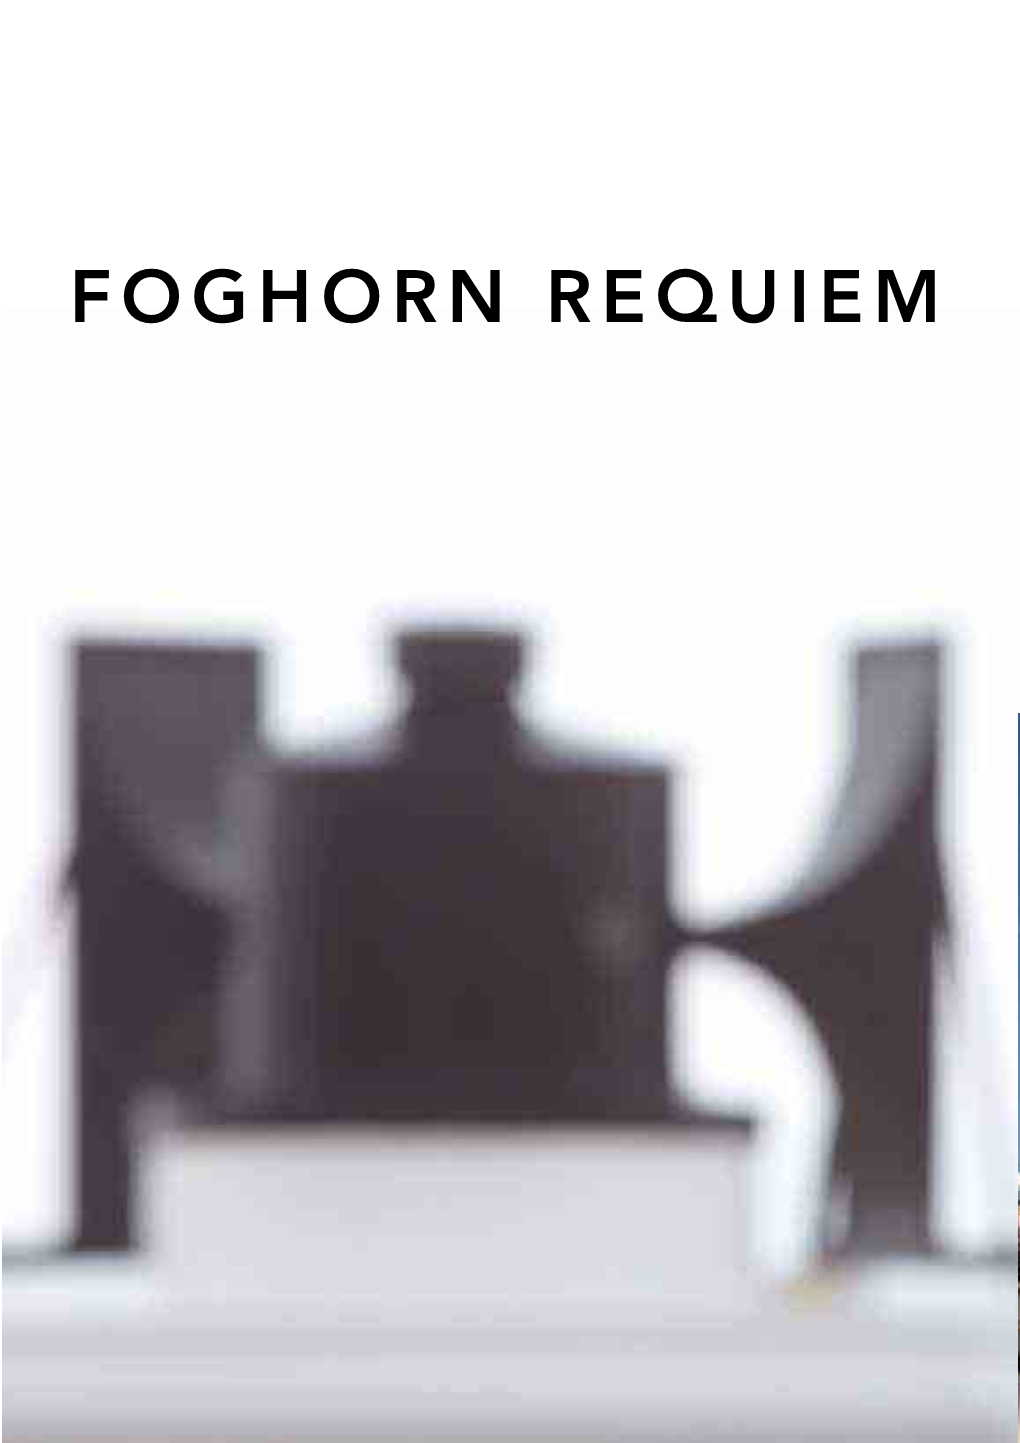 FOGHORN REQUIEM FOGHORN REQUIEM Foghorn Requiem Is a Performance, Marking the Disappearance of the Sound of the Foghorn from the UK’S Coastal Landscape